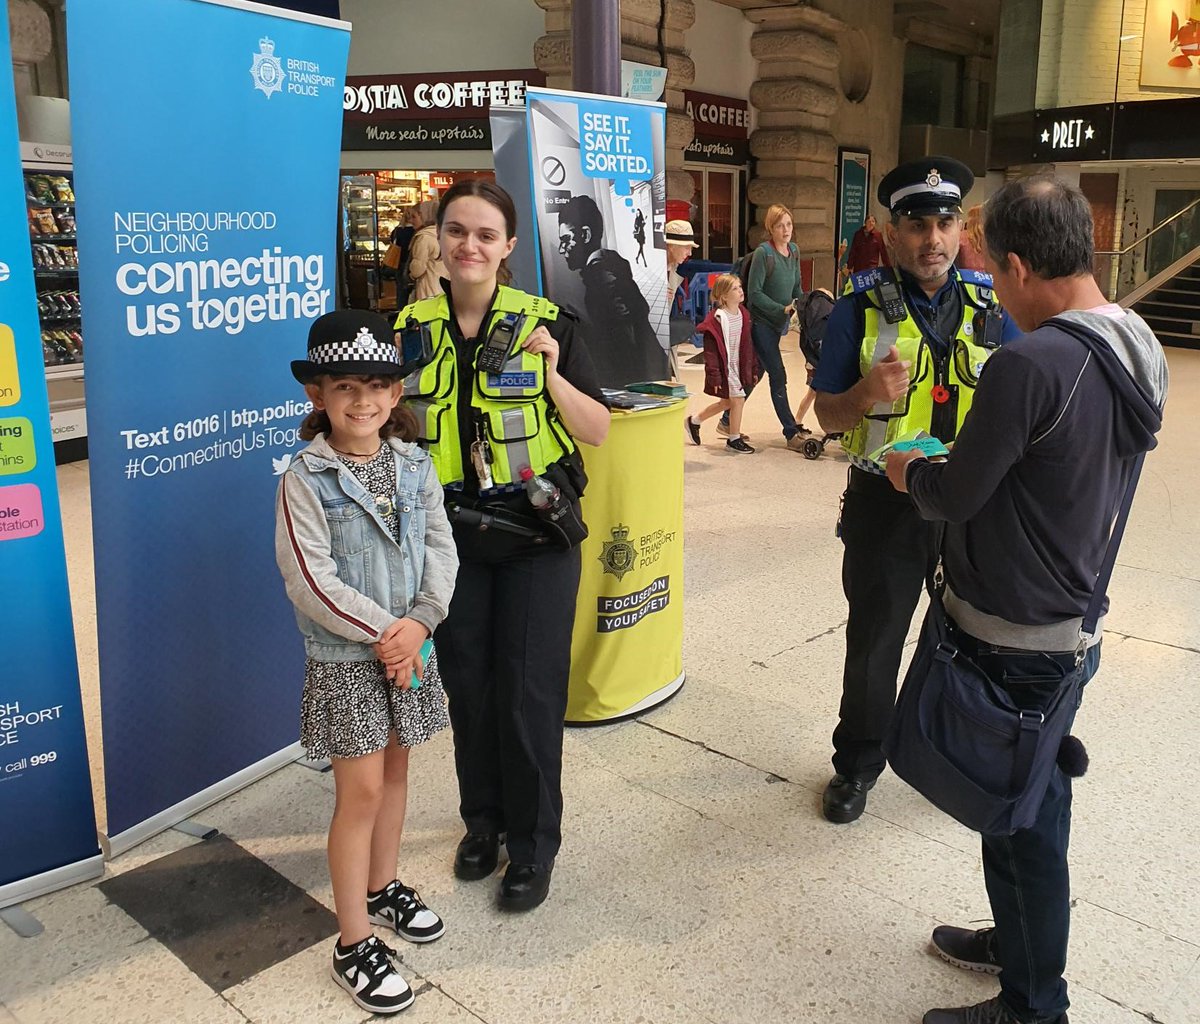 We love talking to our railway communities about their concerns and spreading the message of how we can help. Everyone of all ages can come to us to report incidents or get assistance #Text61016 #RailwayGuardian #Waterloo #SafestTogether 
Dial 999 in an emergency ☎️